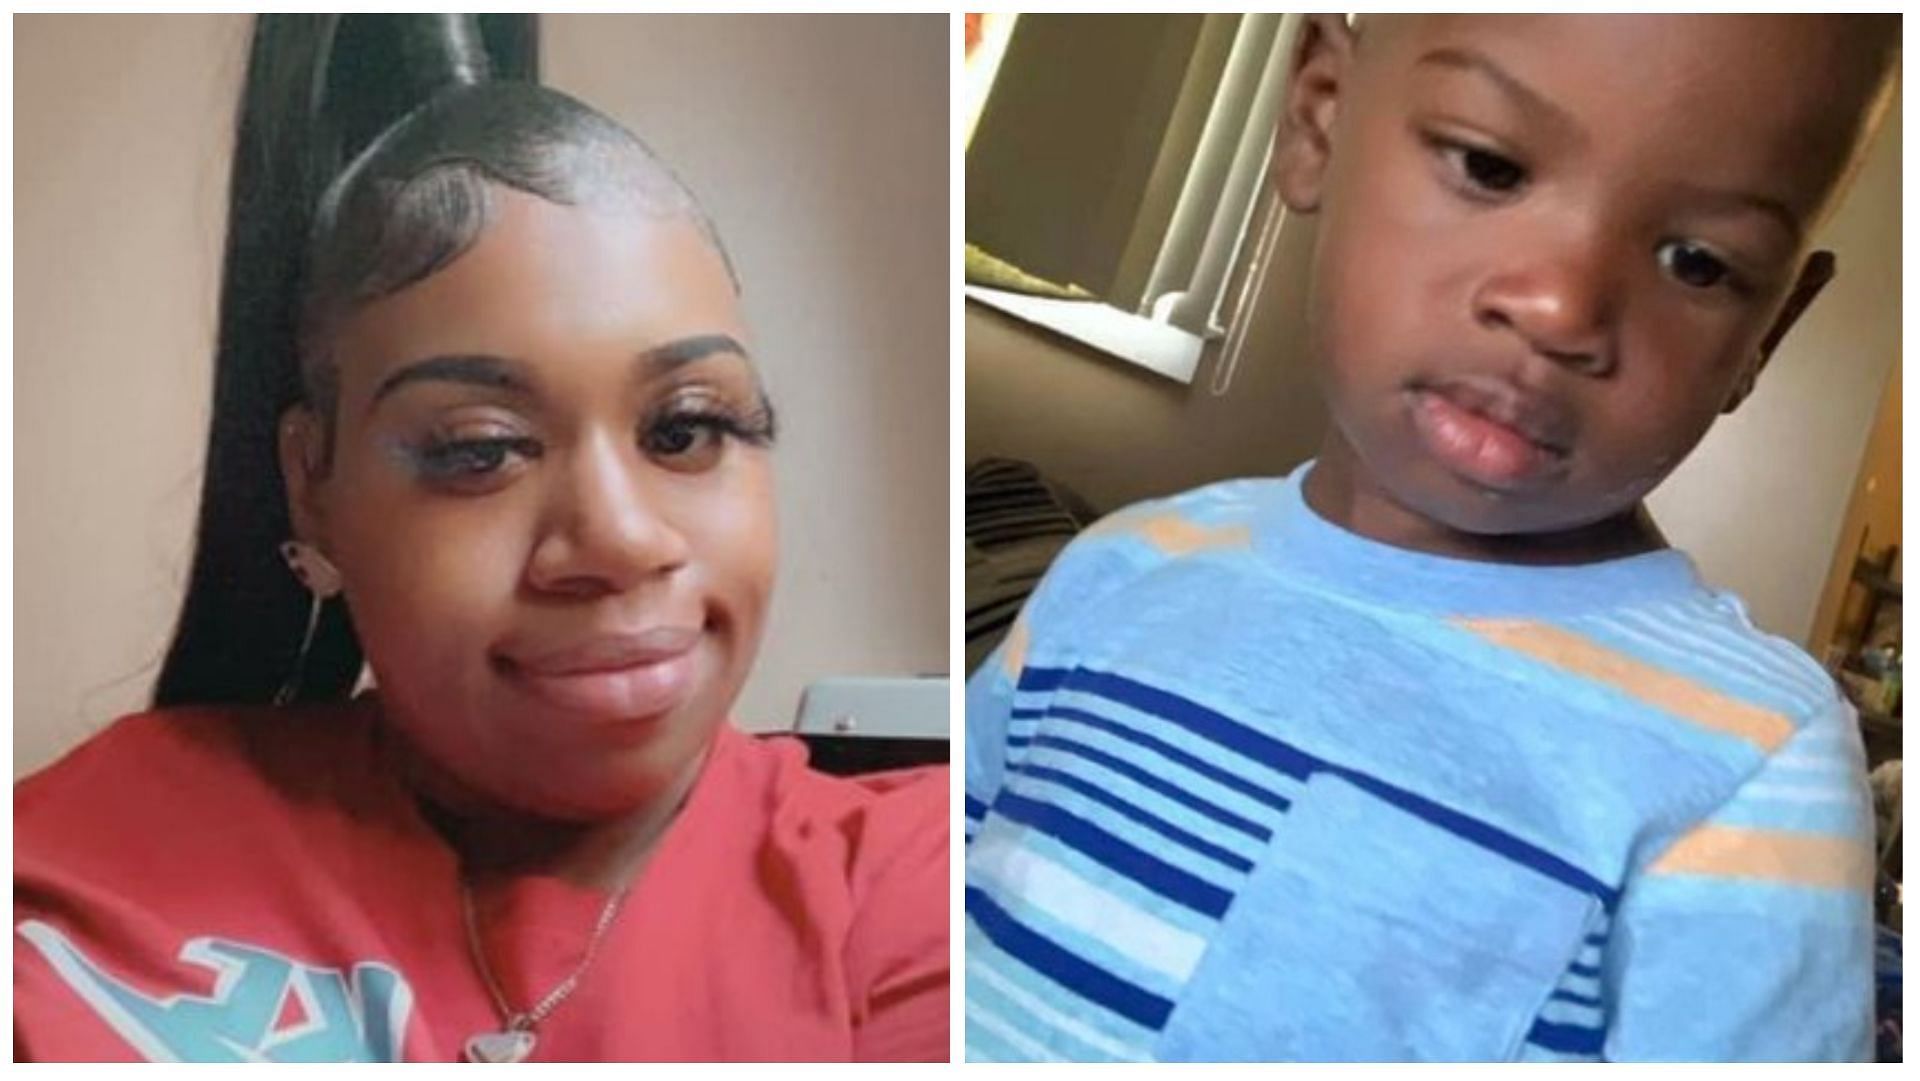 Detroit mom Azuradee France (left) charged with murder after toddler found dead in a freezer (Image via Twitter/Jessica Dupnack)